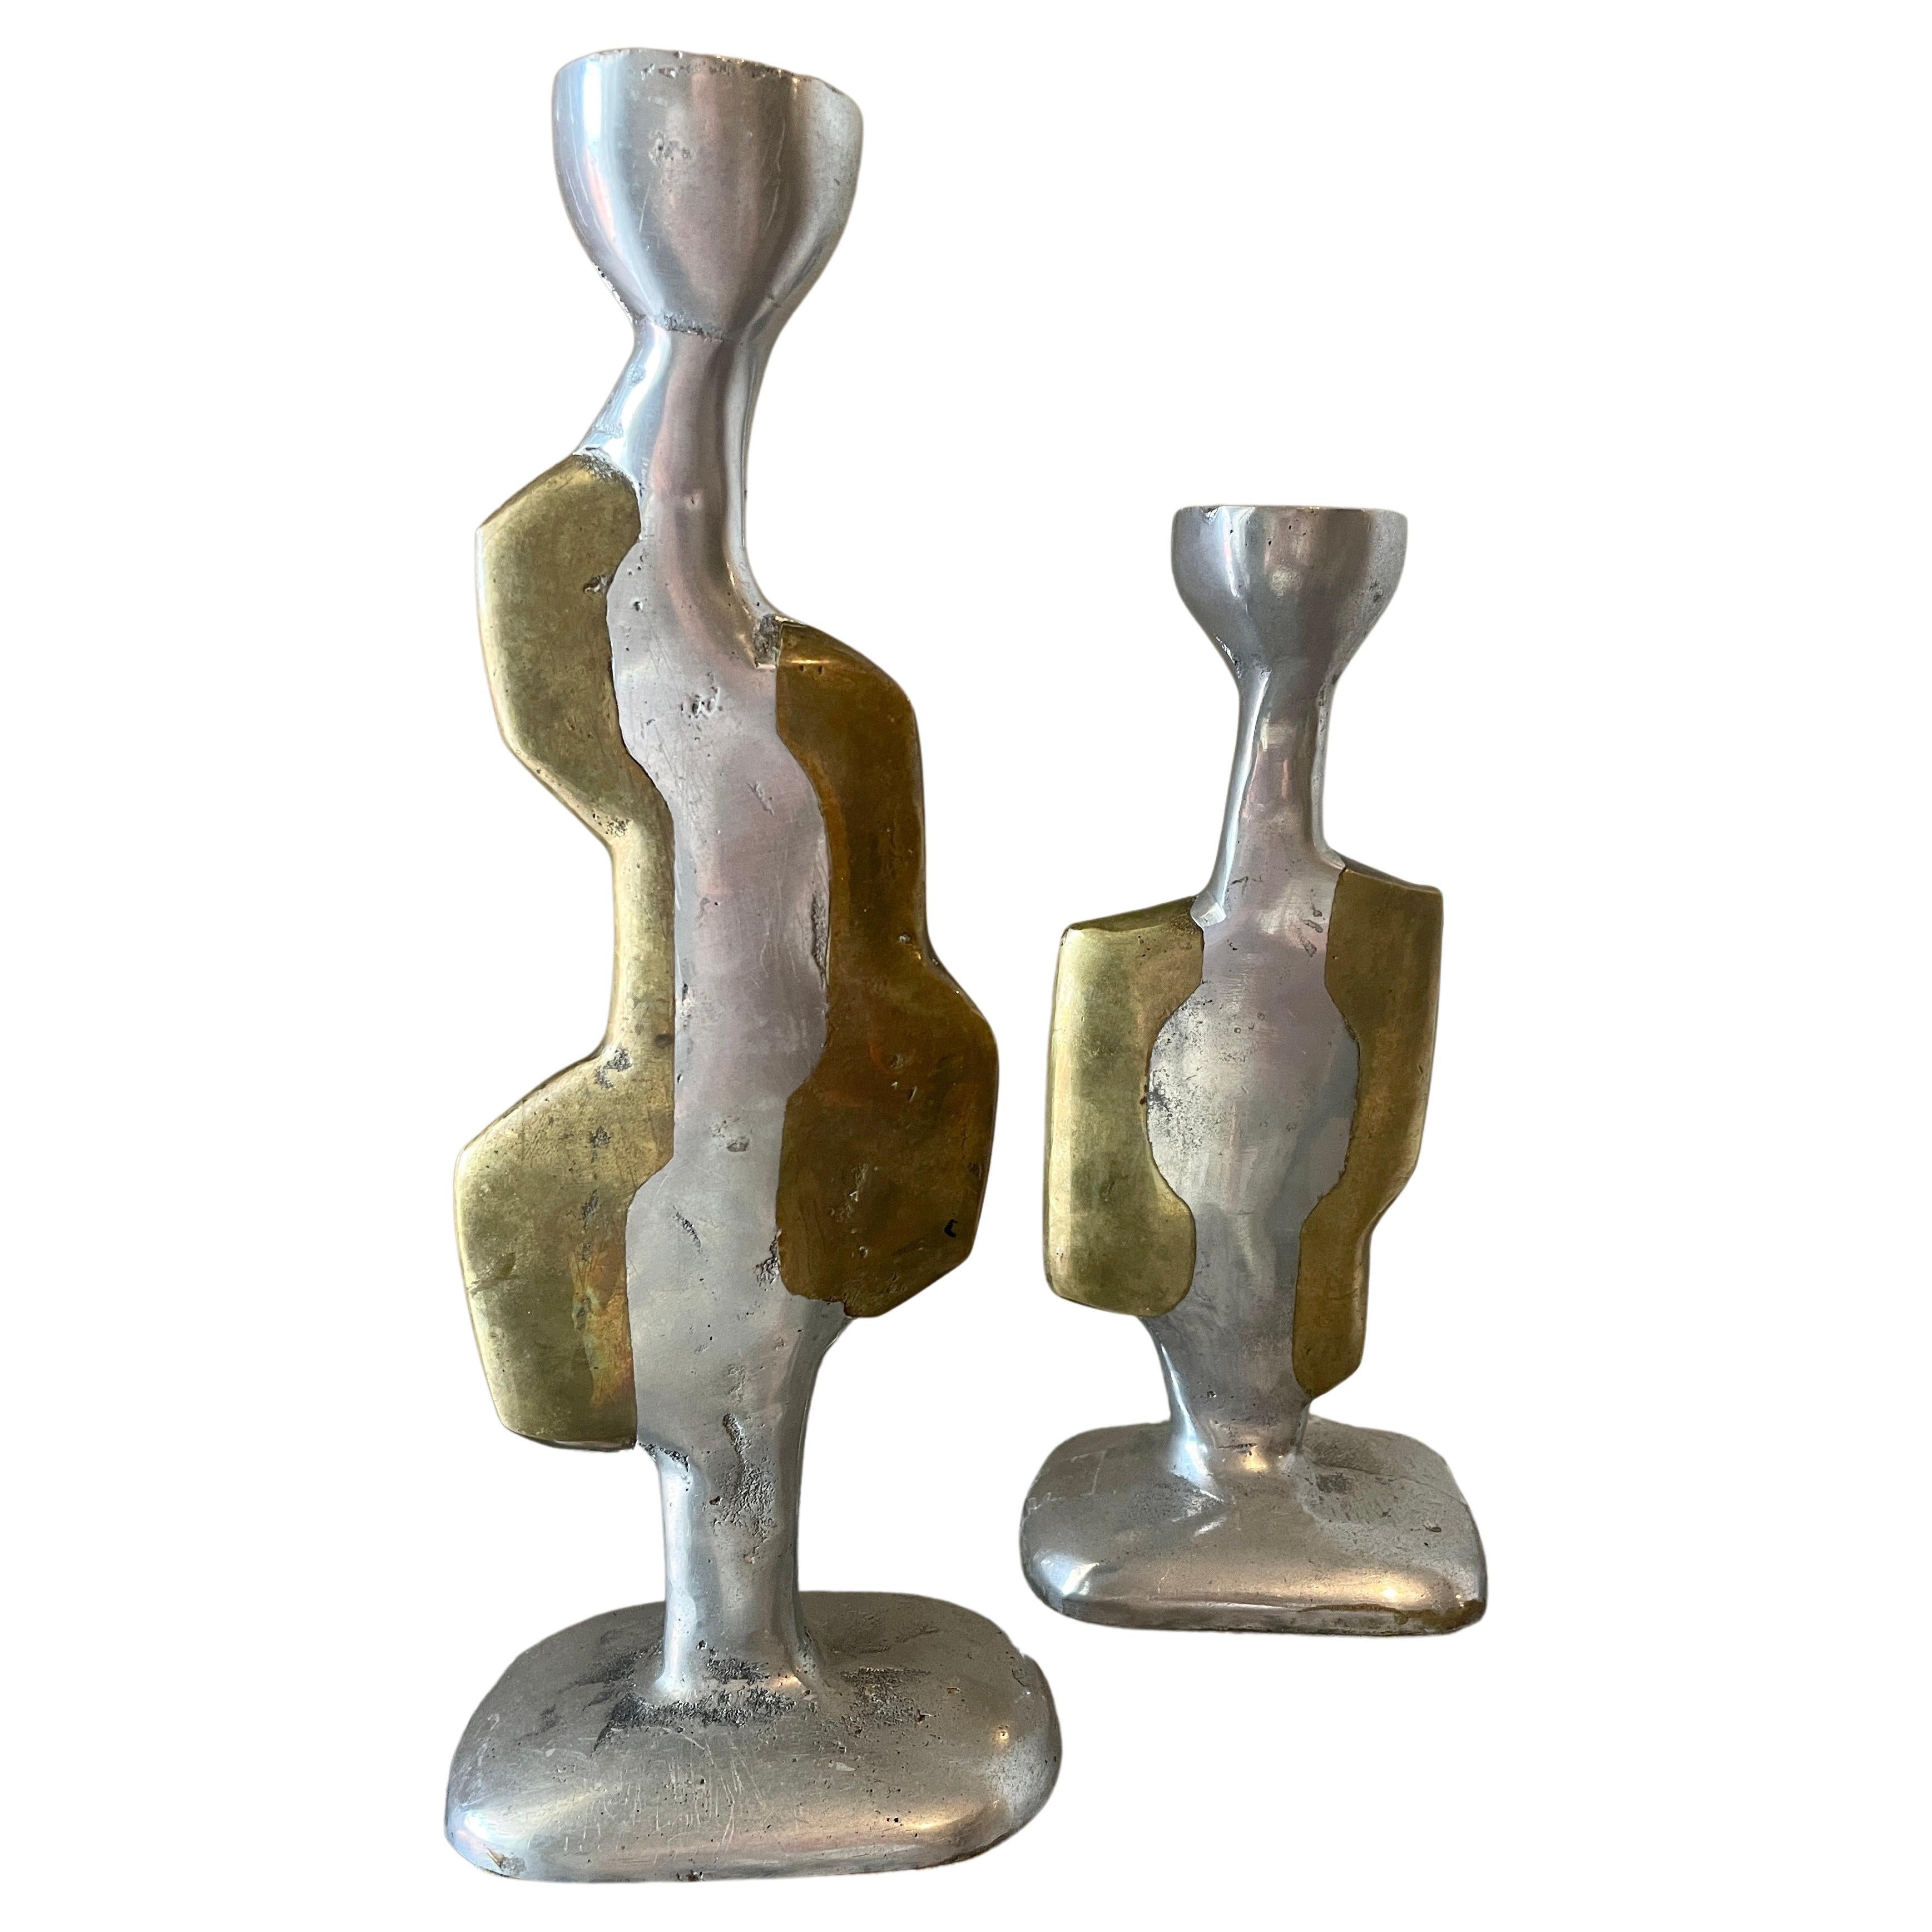 David Marshall Brutalist Candle Sticks, a Pair For Sale